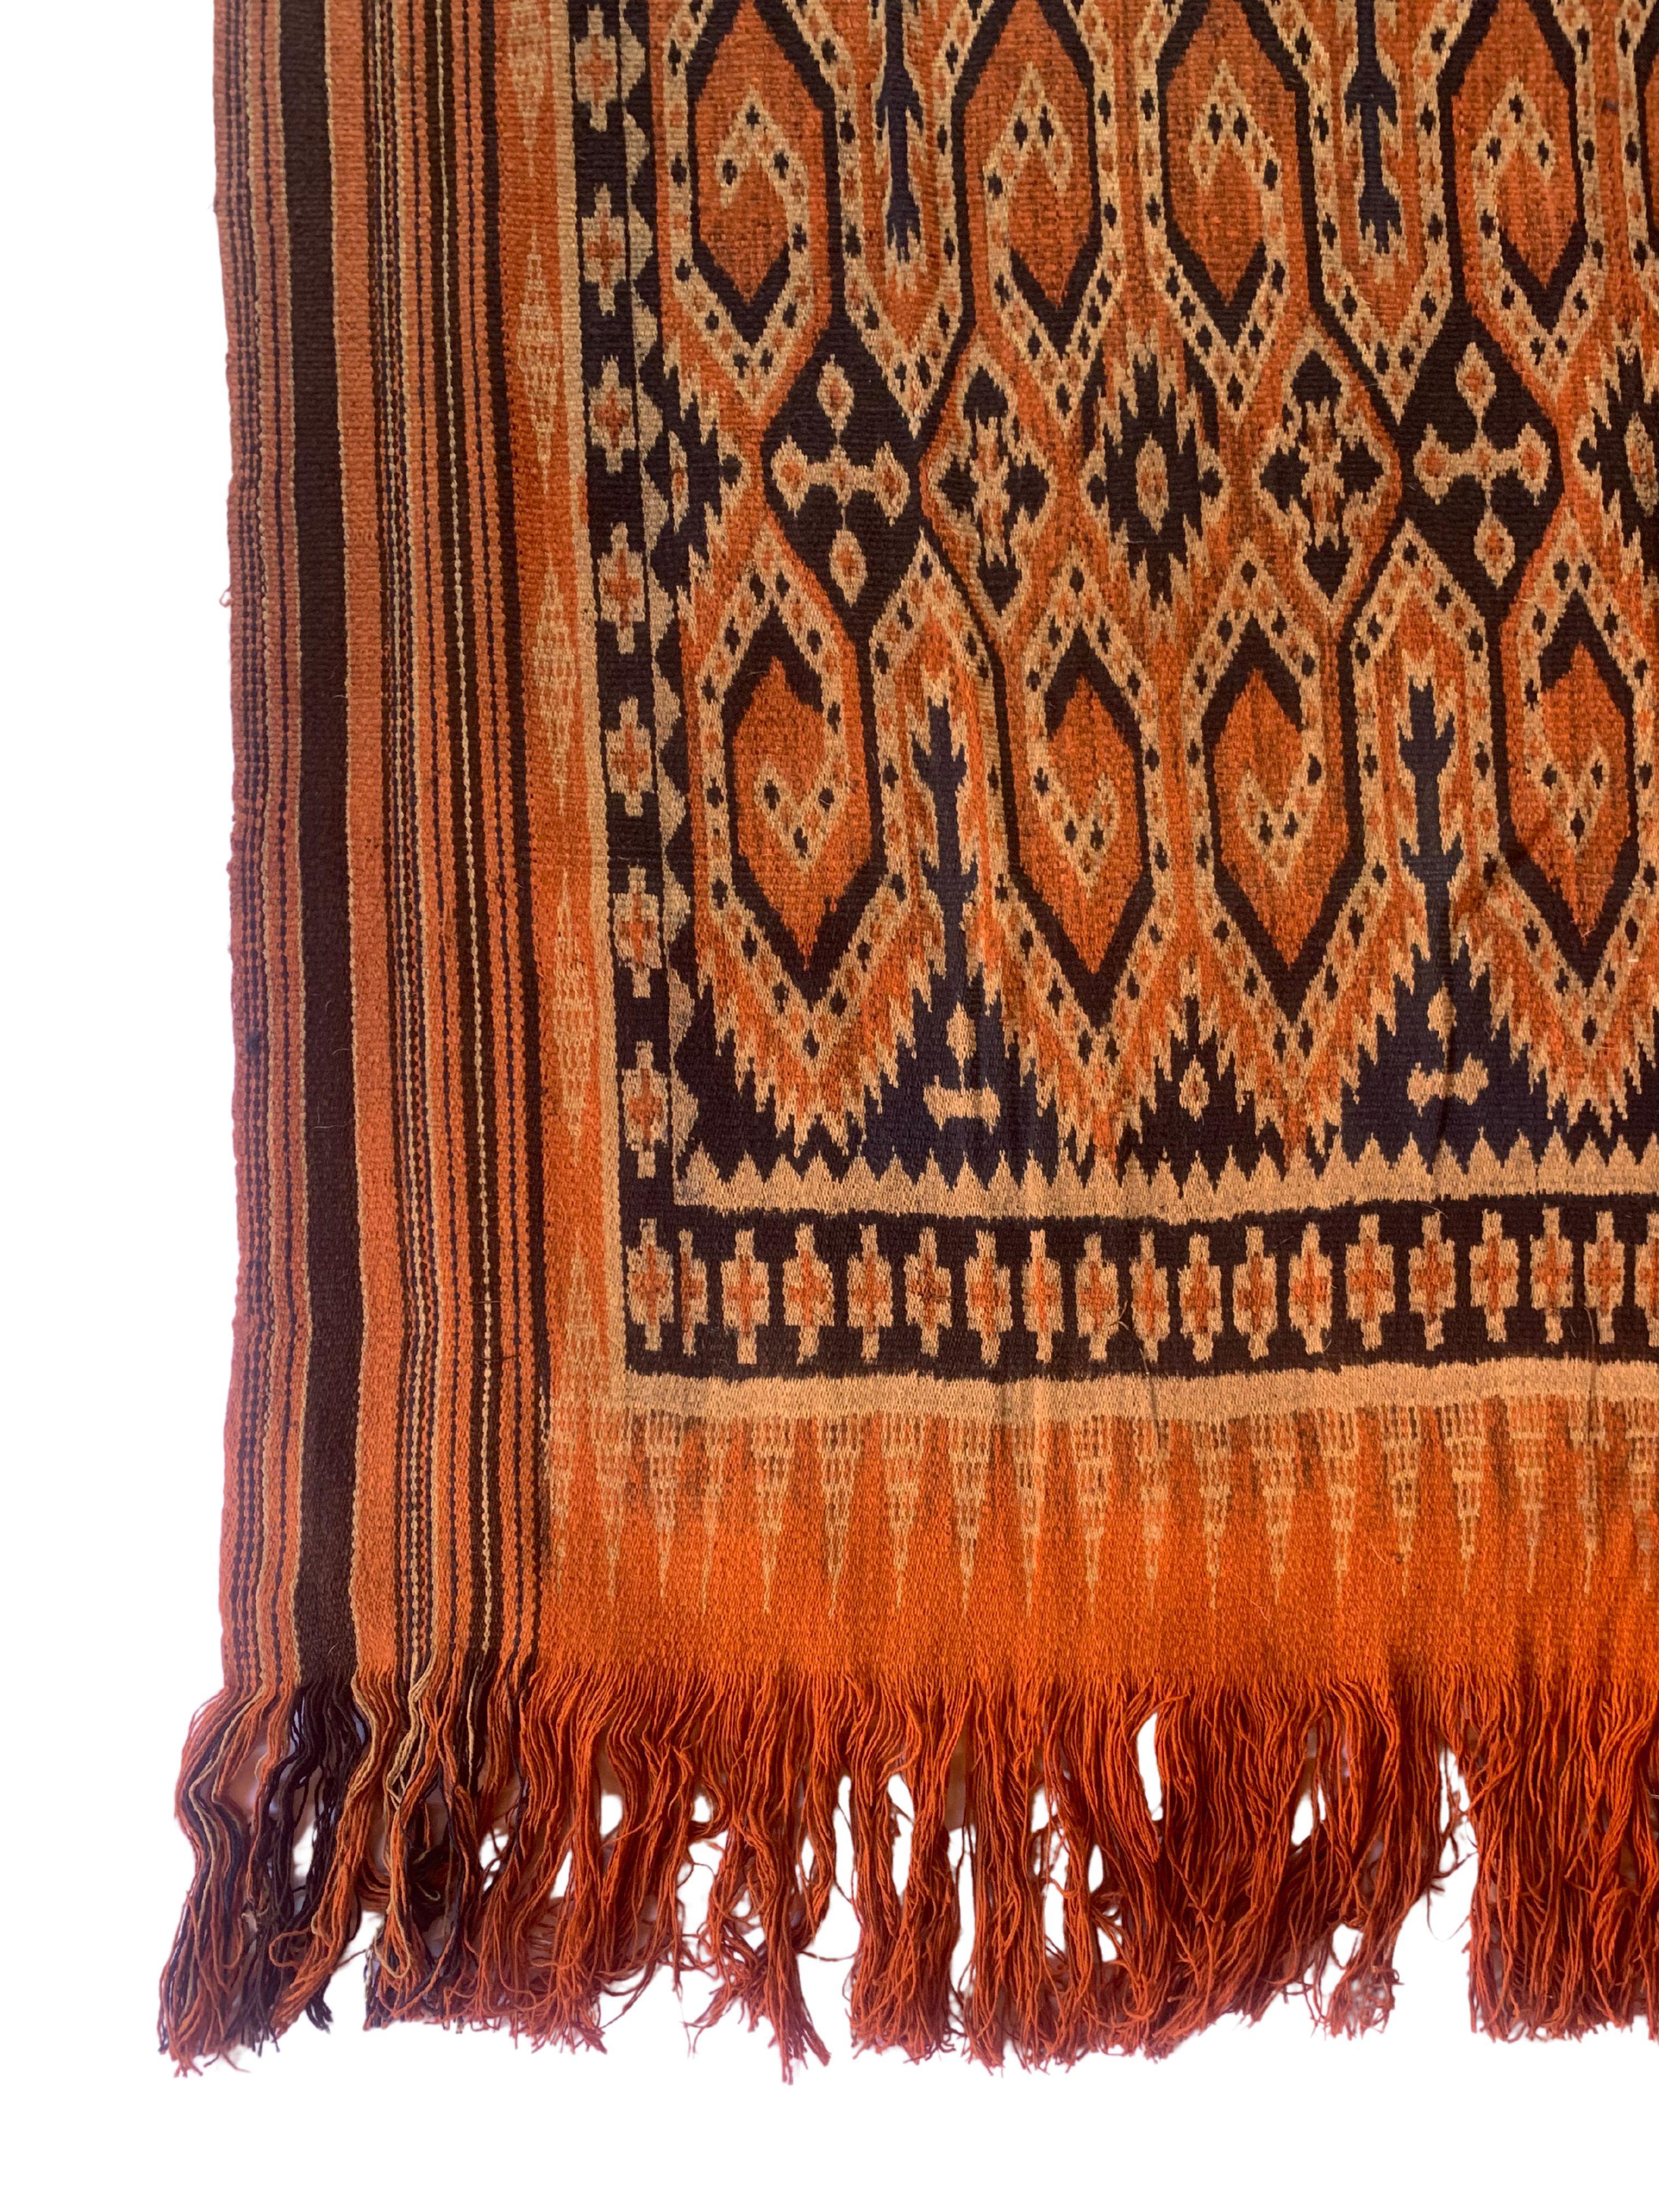 Hand-Woven Ikat Textile from Toraja Tribe of Sulawesi with Stunning Tribal Motifs C. 1950 For Sale